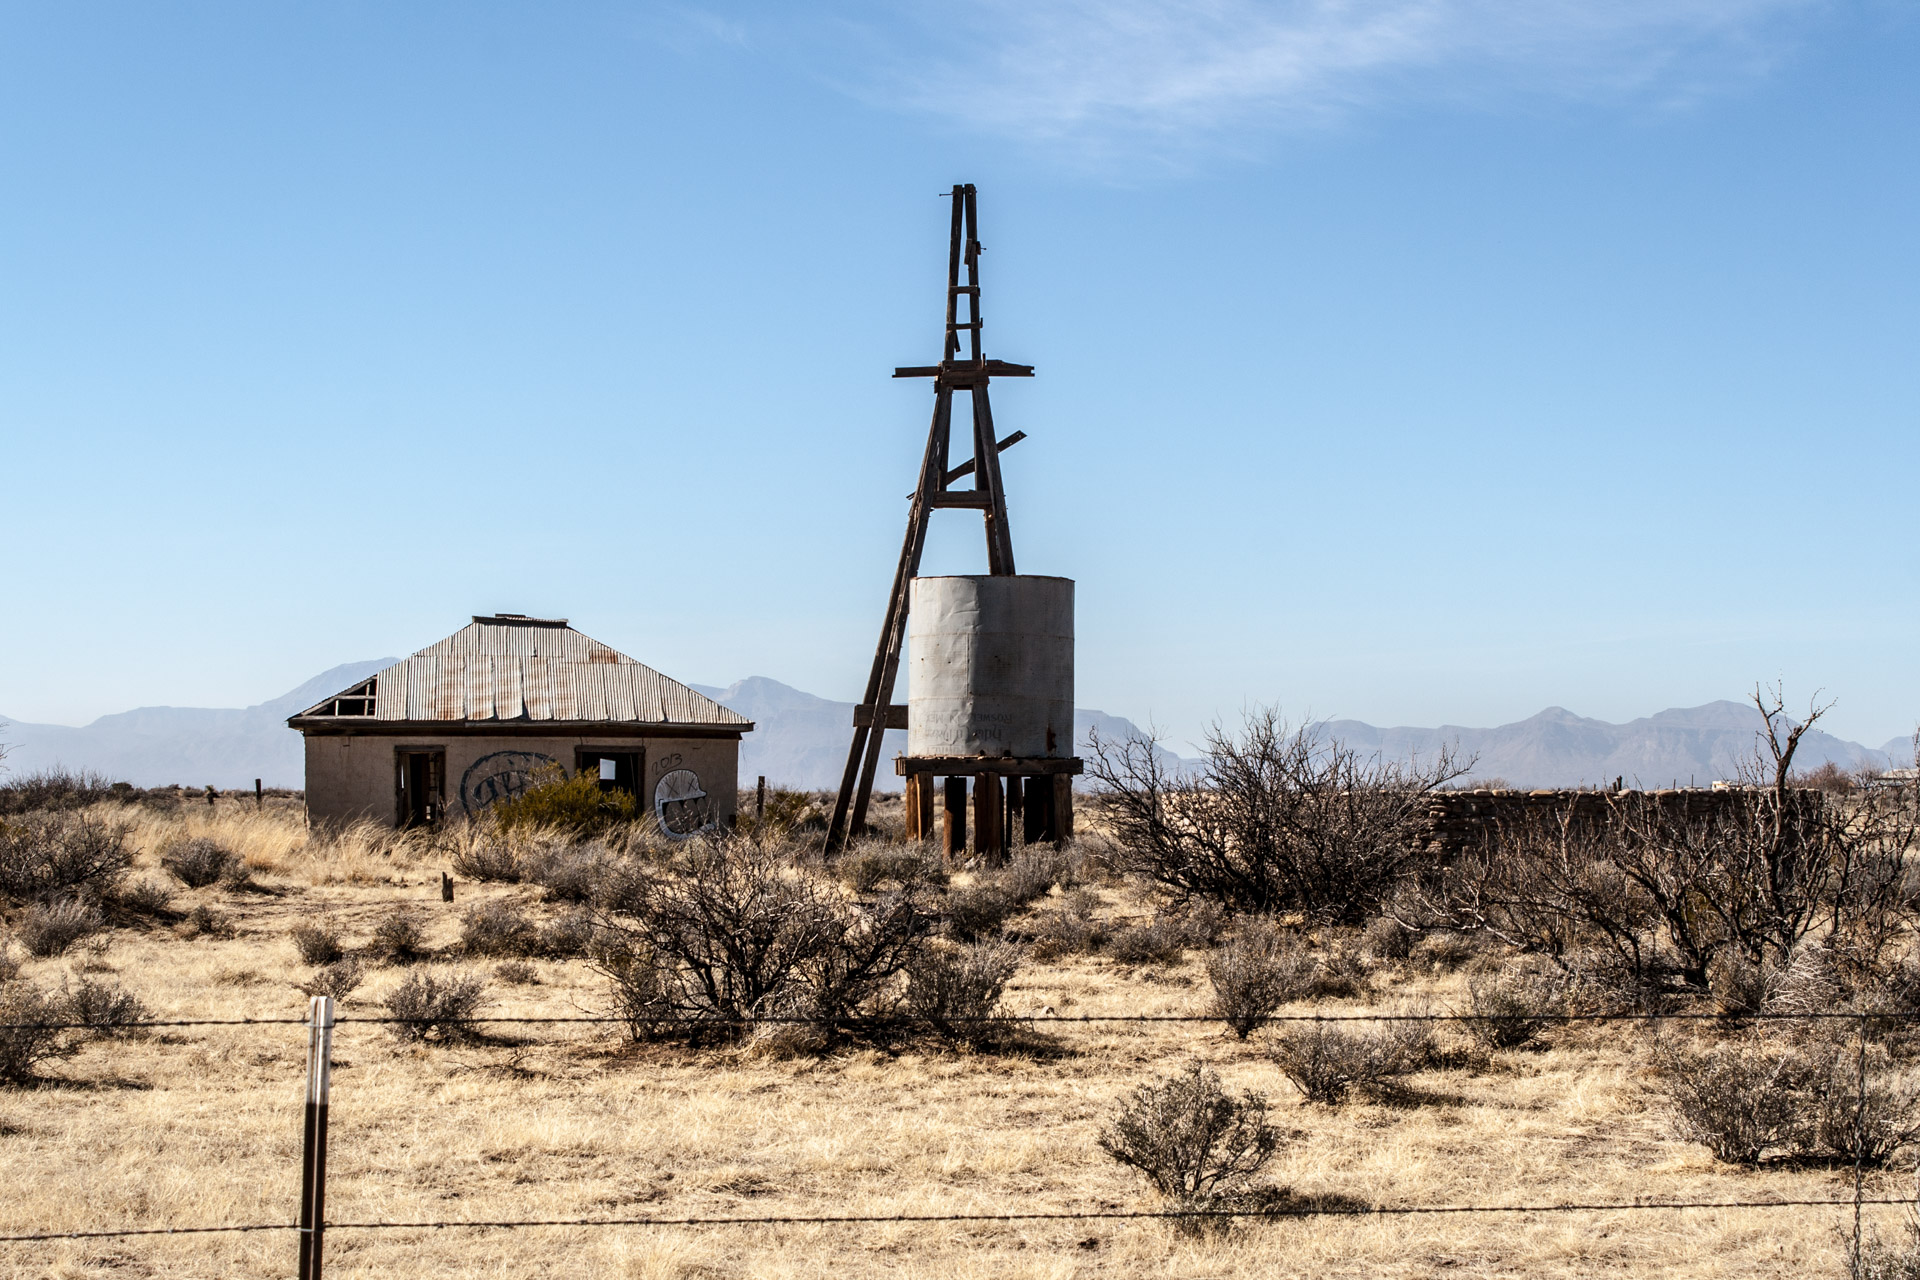 Tularosa, New Mexico - A Desert House With An Extra Large Well (front mid)